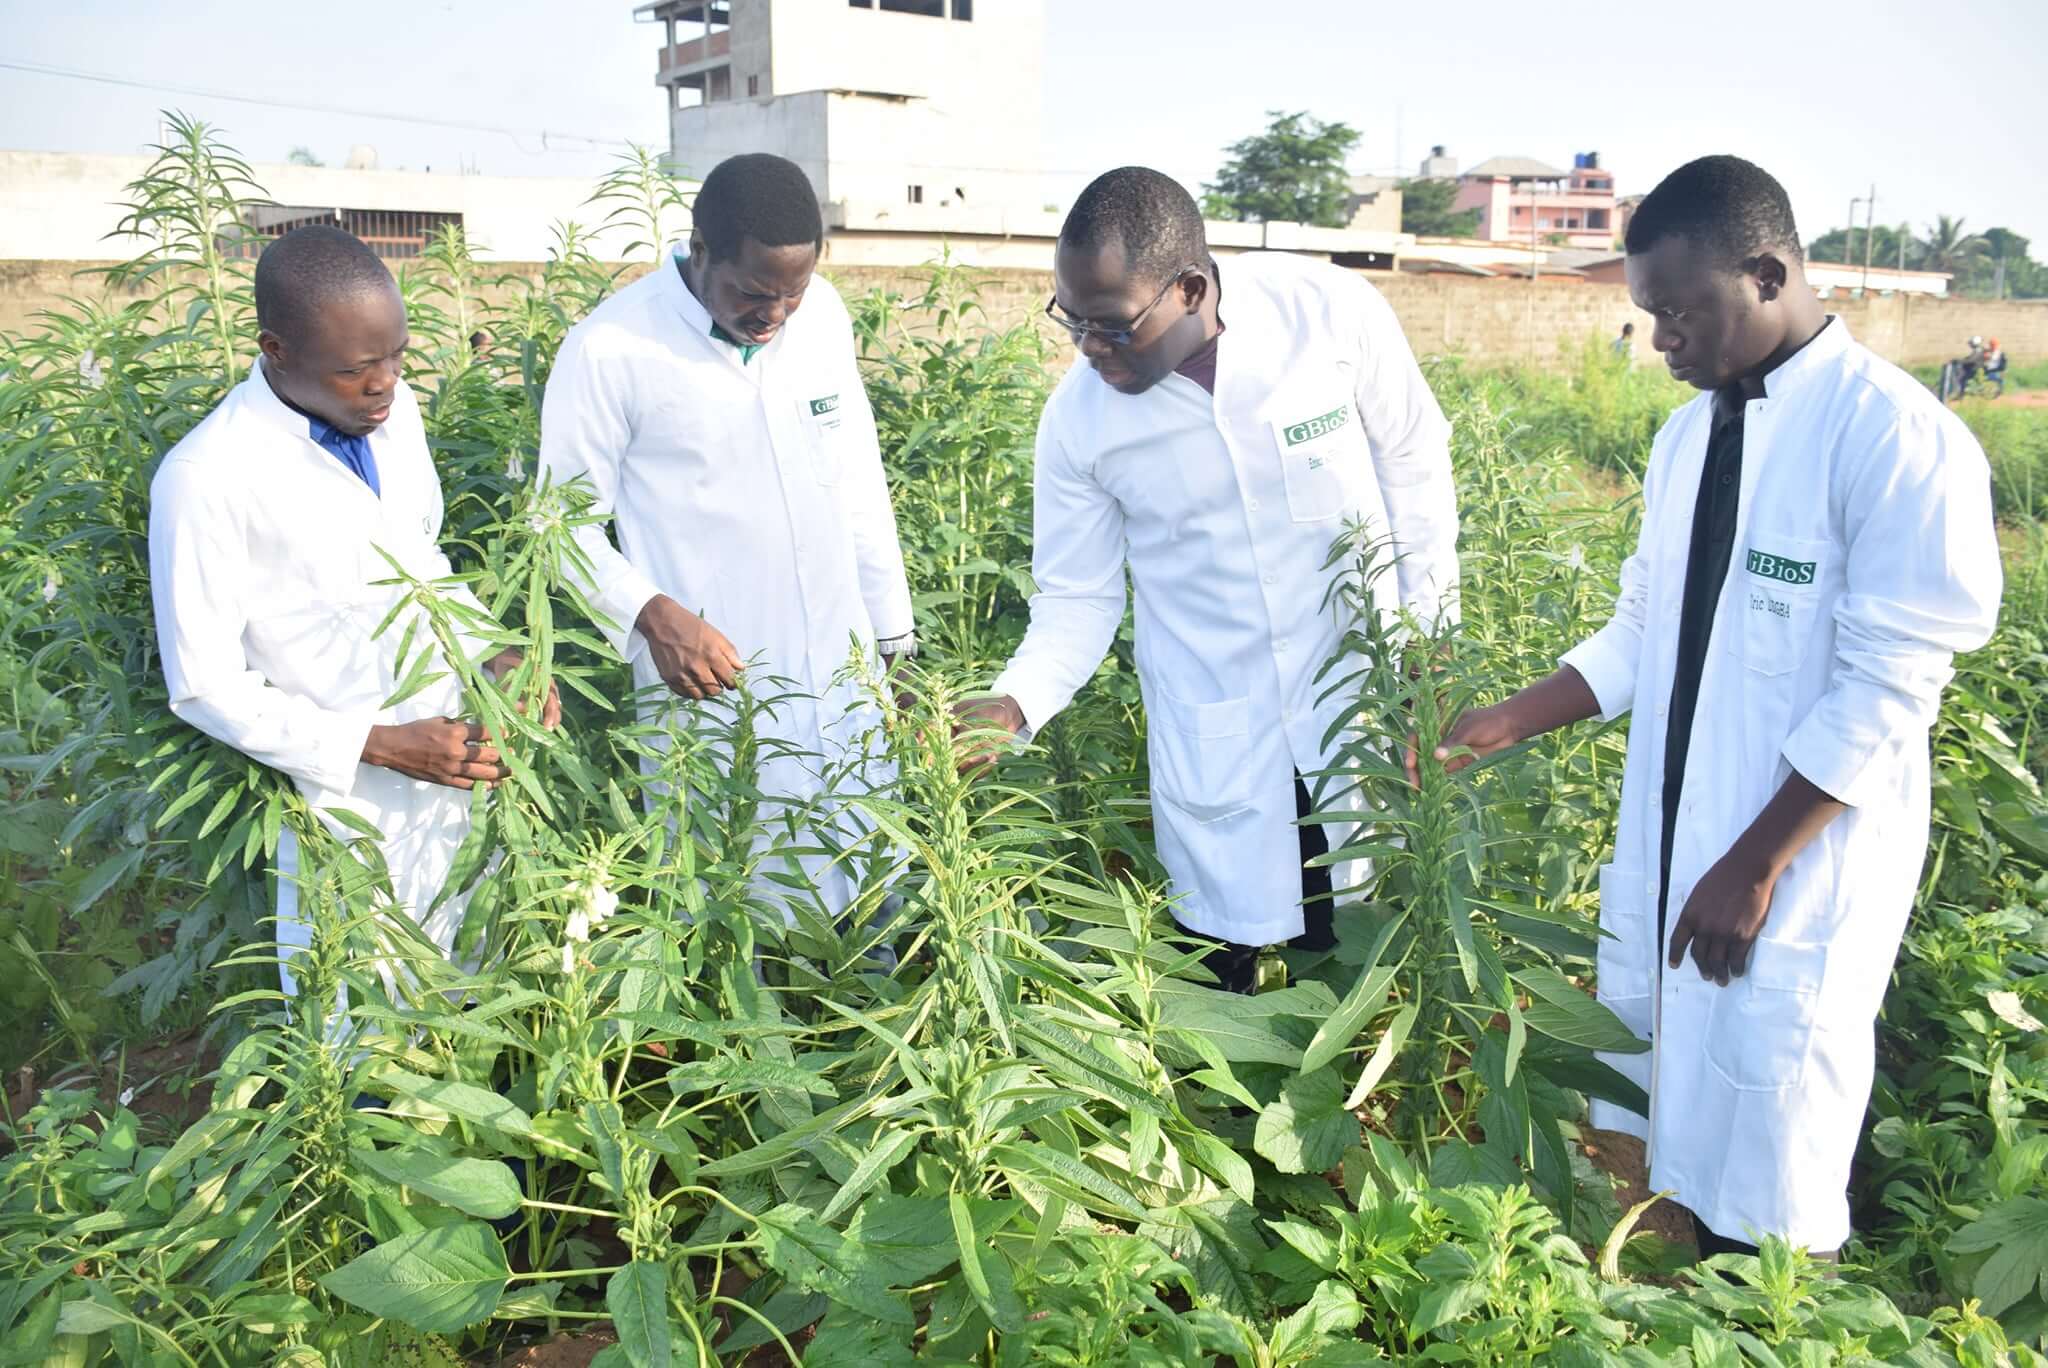 Dr. Enoch Achigan-Dako inspects crops in the university's teaching fields with his students